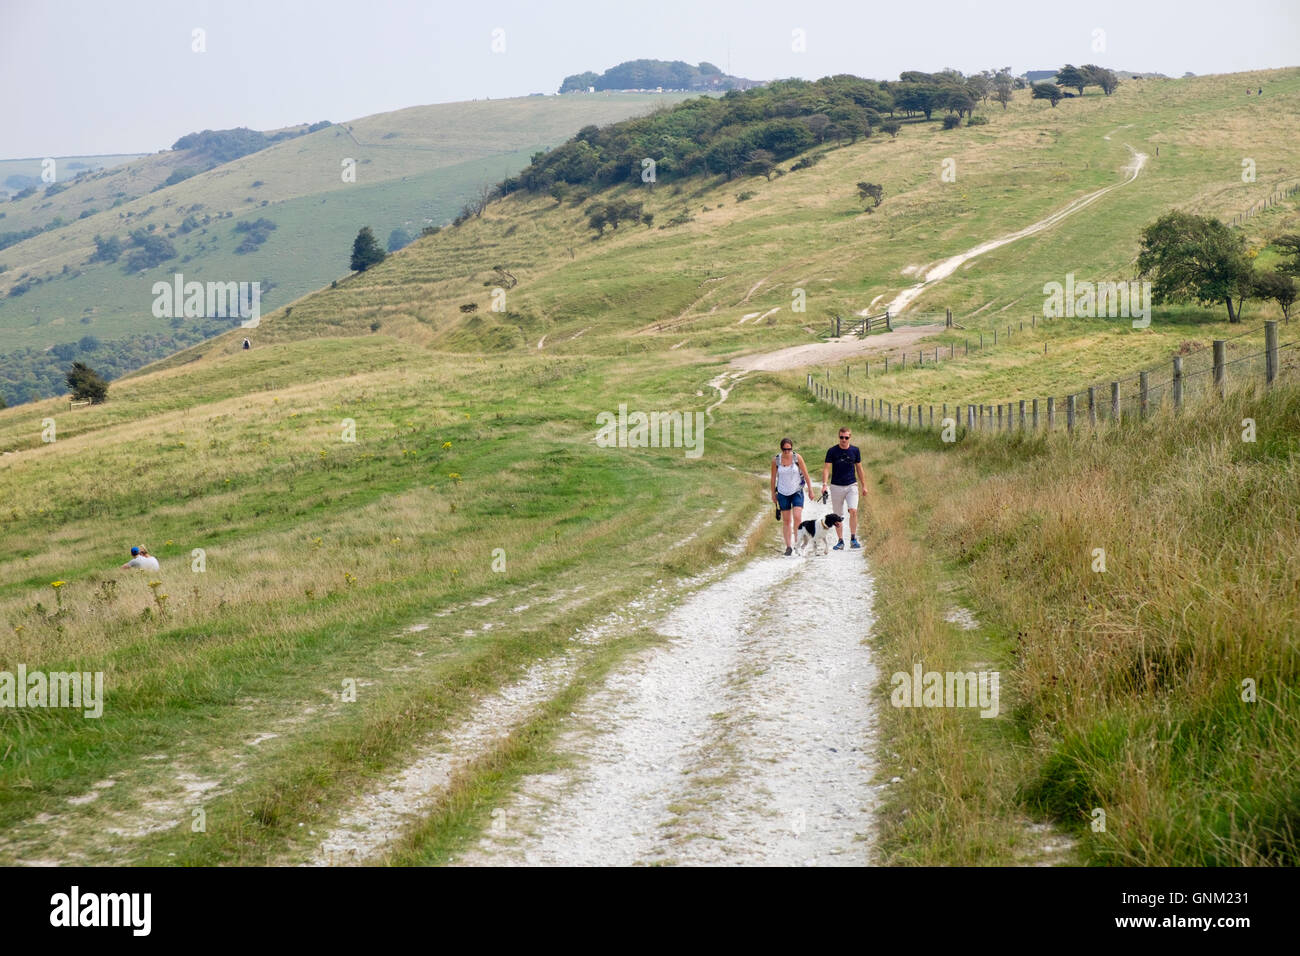 Two people walking a dog on South Downs Way trail path in South Downs National Park countryside. Fulking Hill, Brighton, West Sussex, England, UK Stock Photo